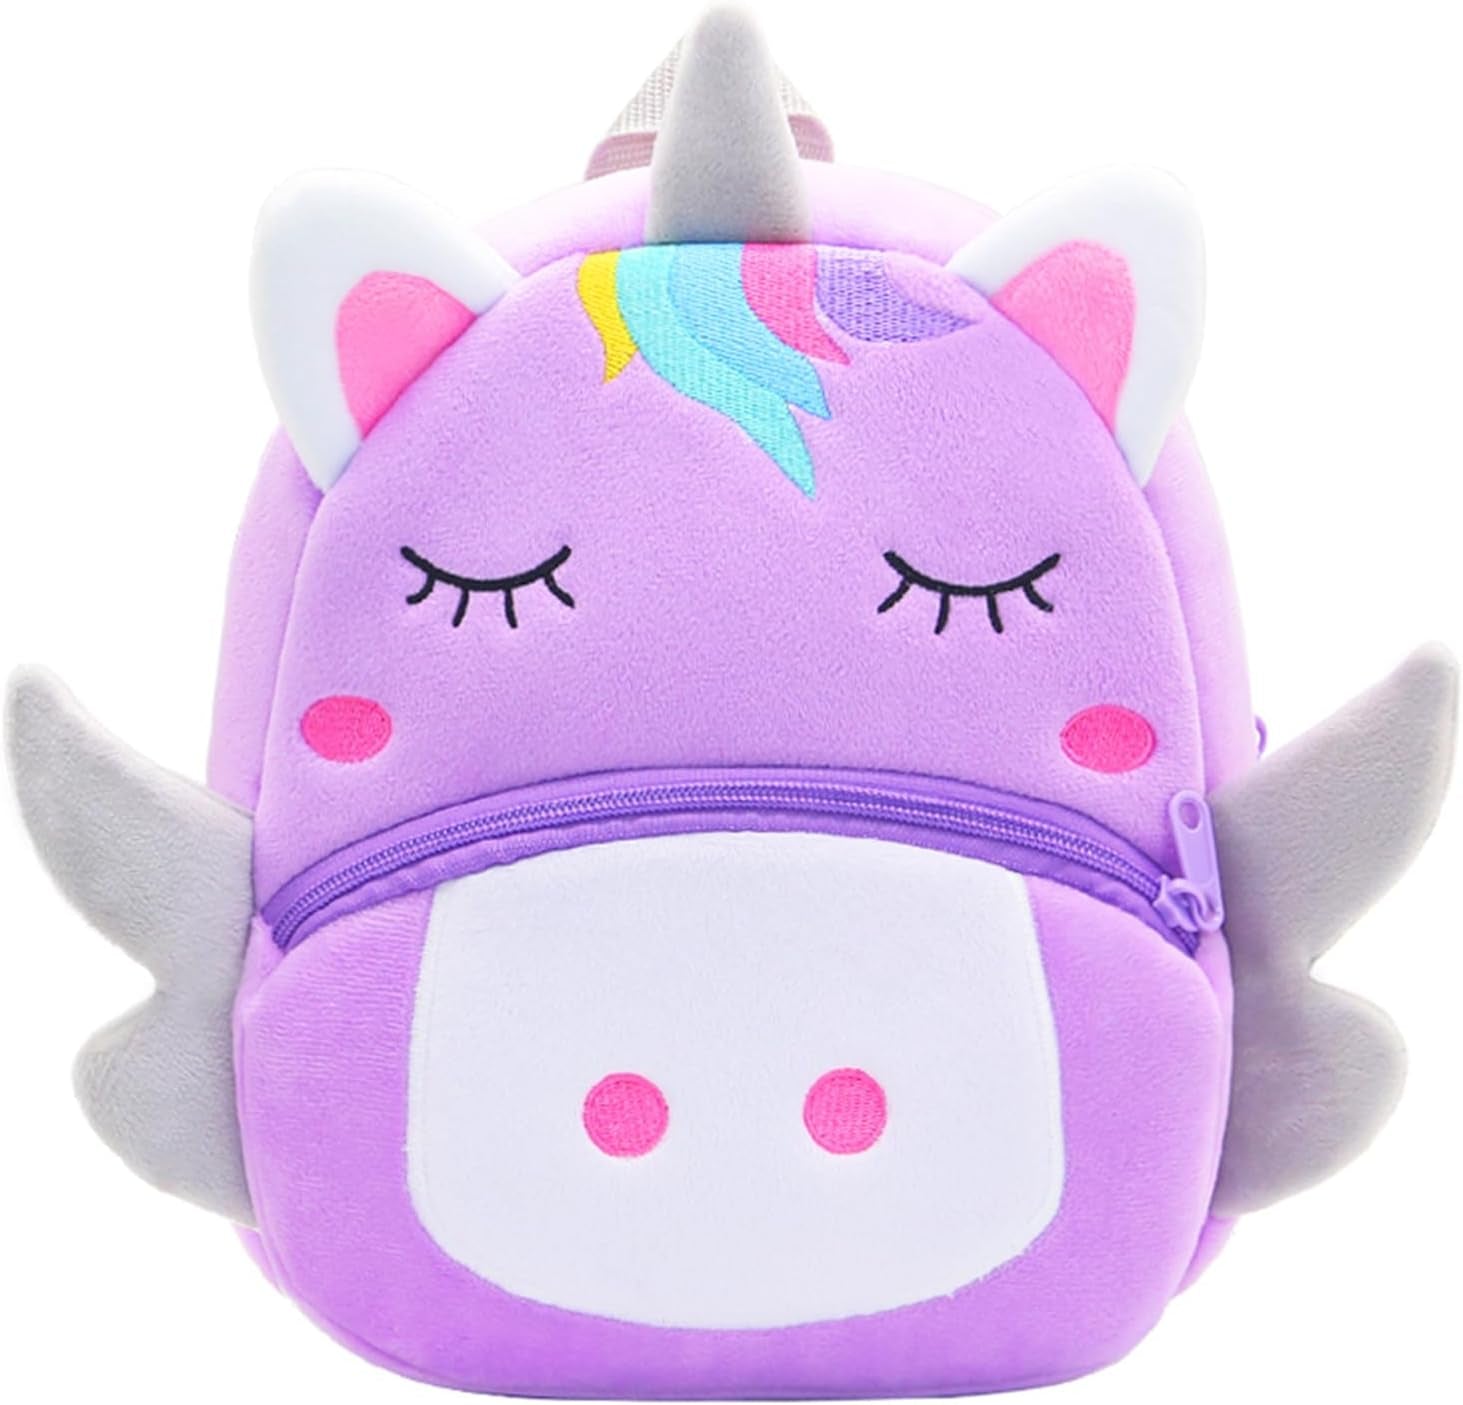 Toddler Backpack for Boys and Girls, Cute Soft Plush Animal Cartoon Mini Backpack Little for Kids 2-6 Years (Purple Unicorn)